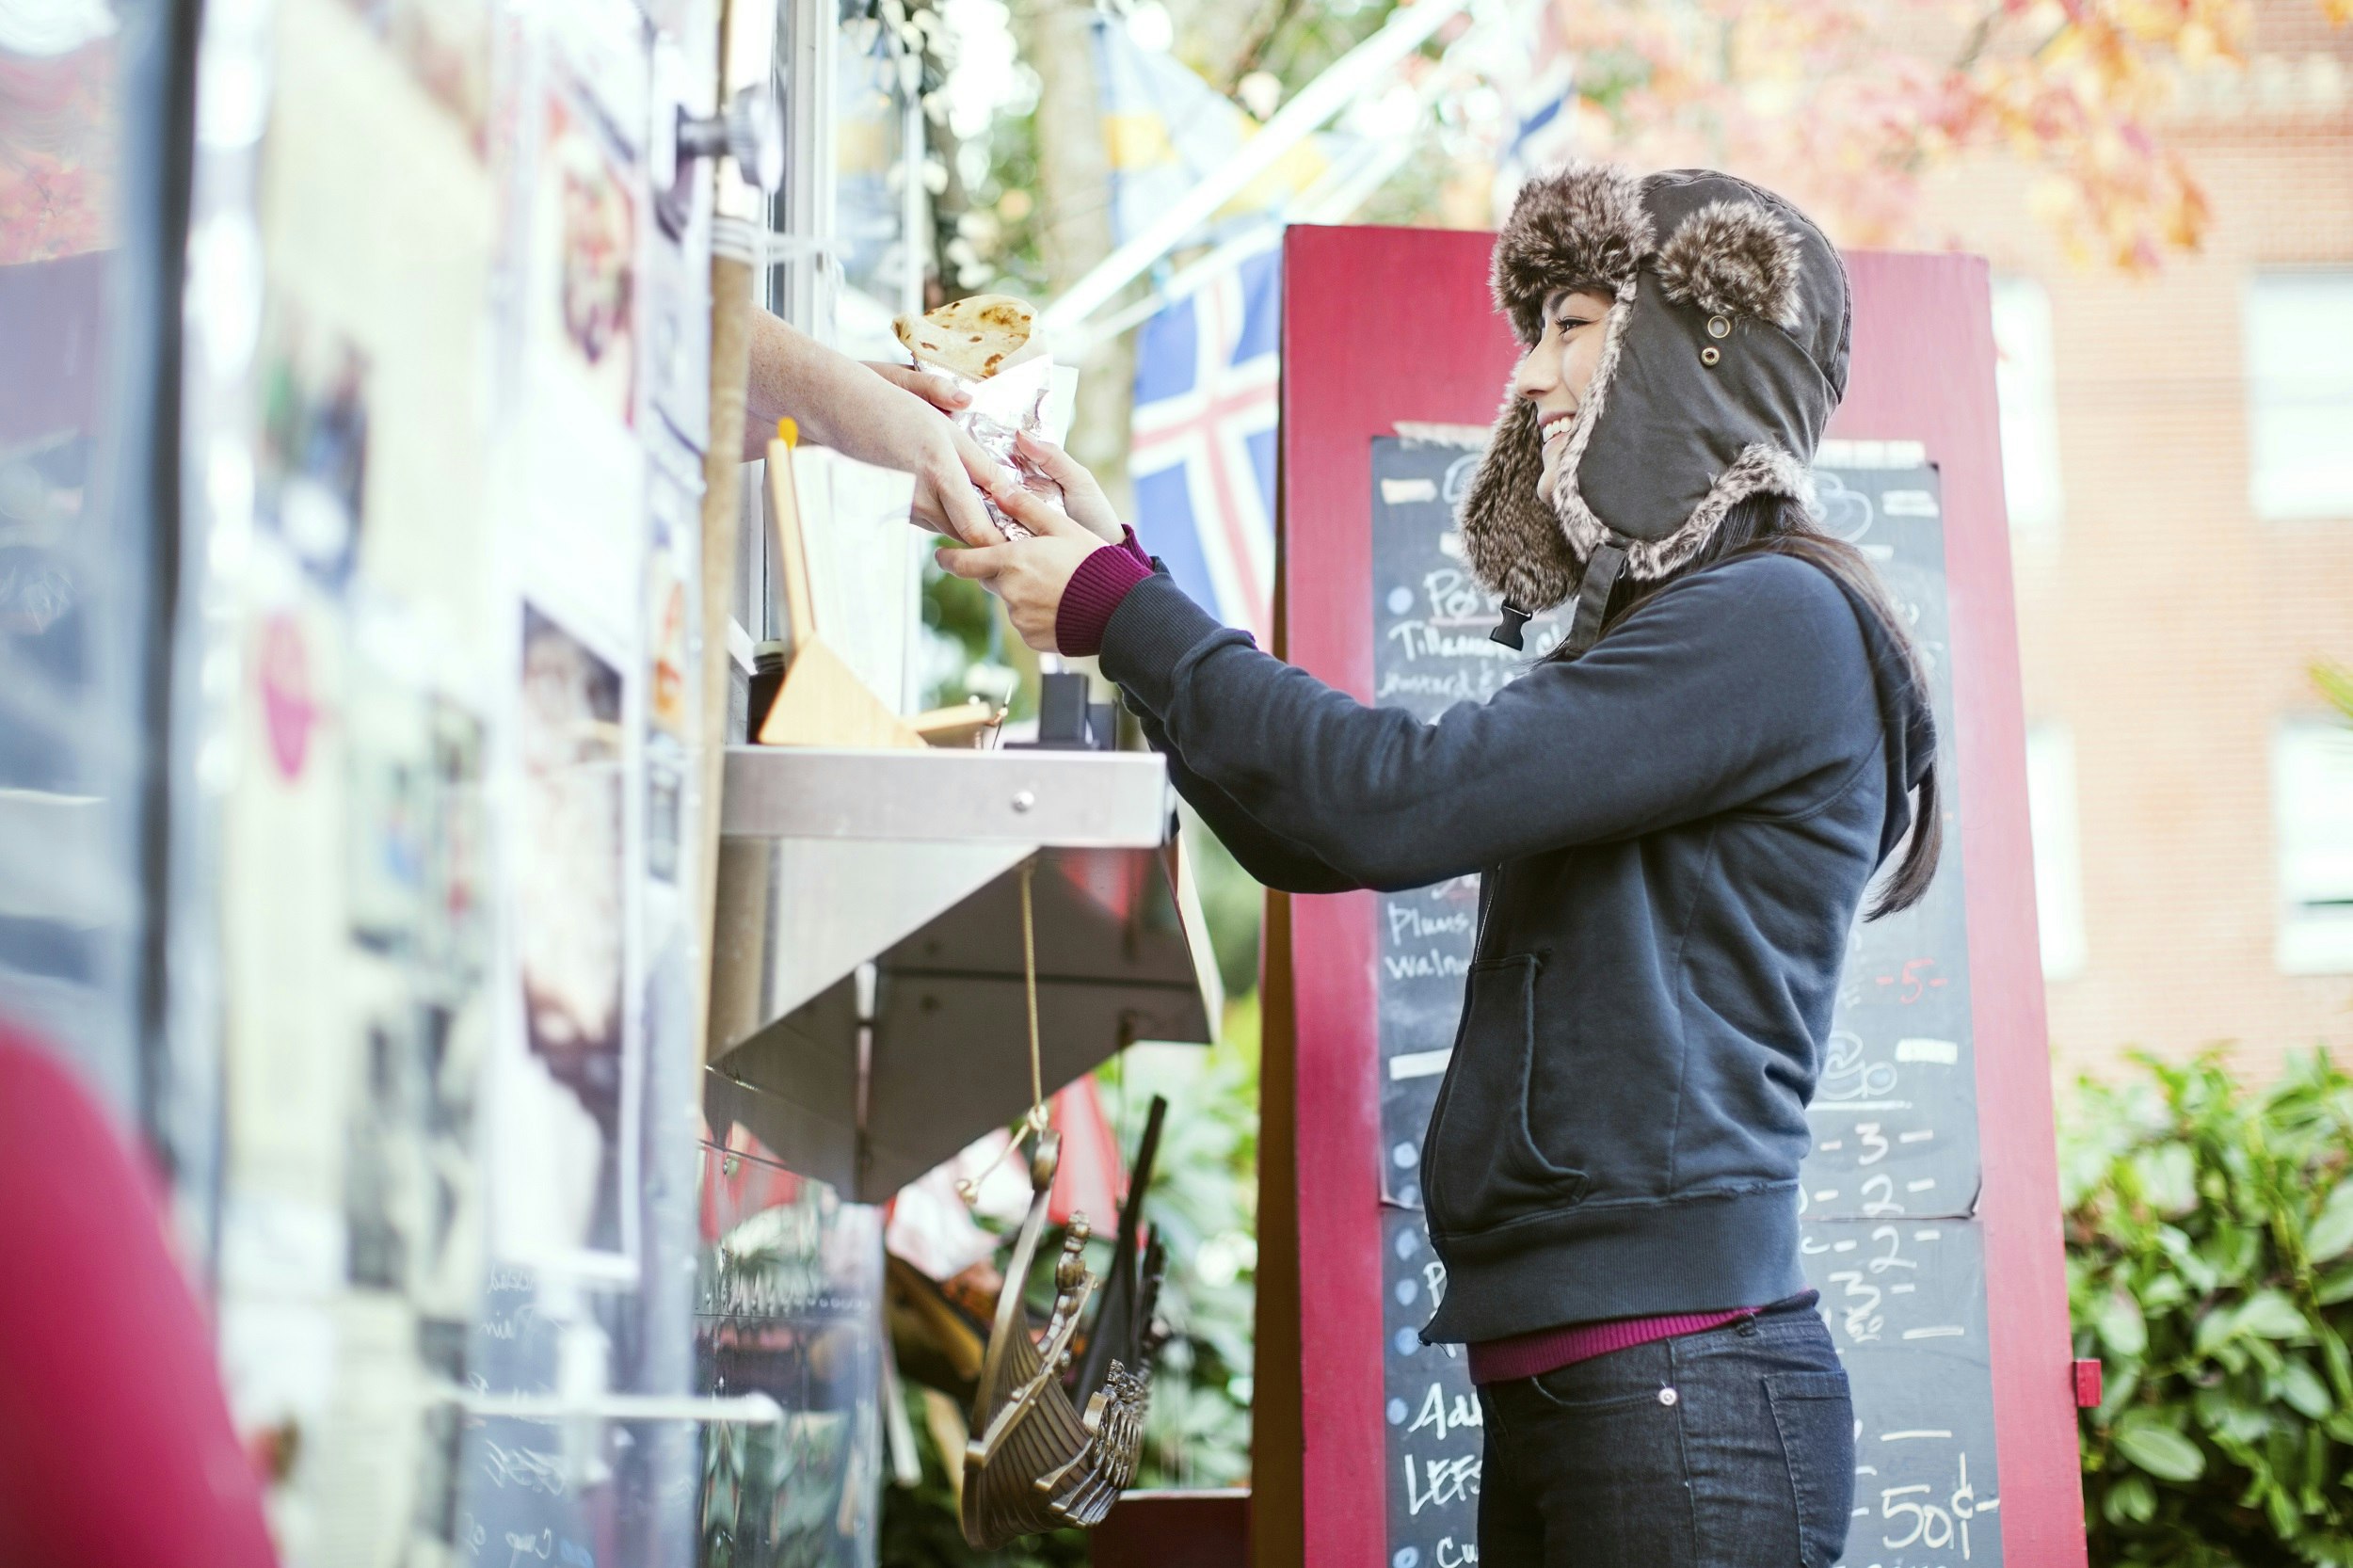 A smiling woman grabs a foil-wrapped meal from the hands of a vendor who is leaning out of a food truck.